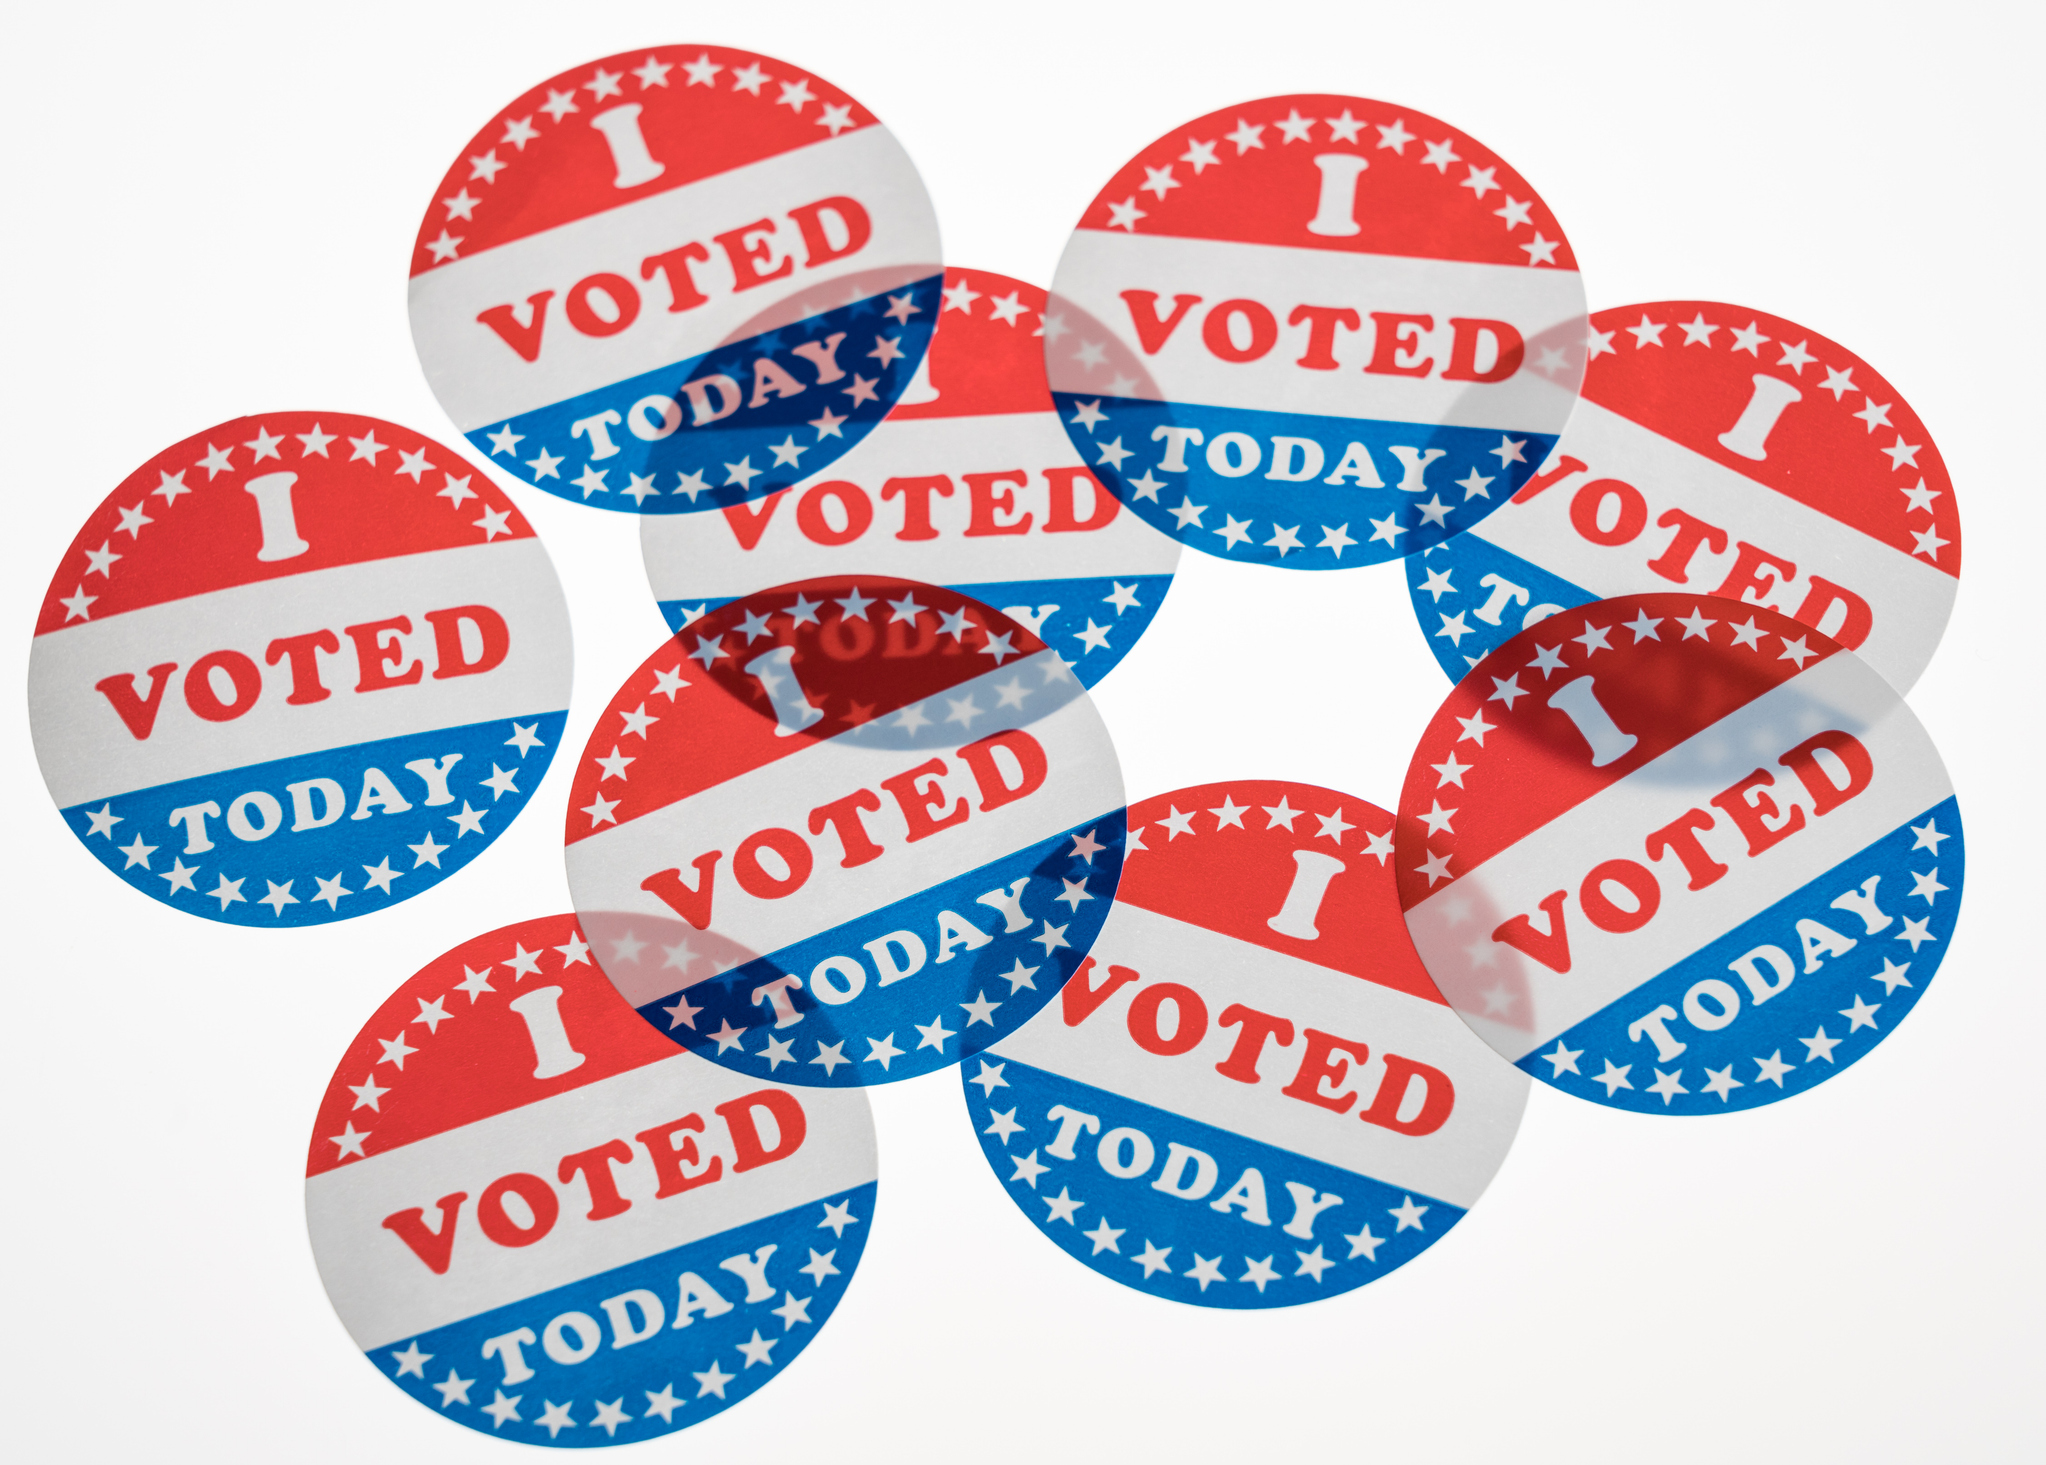 A photo of overlapping "I Voted Today" stickers.